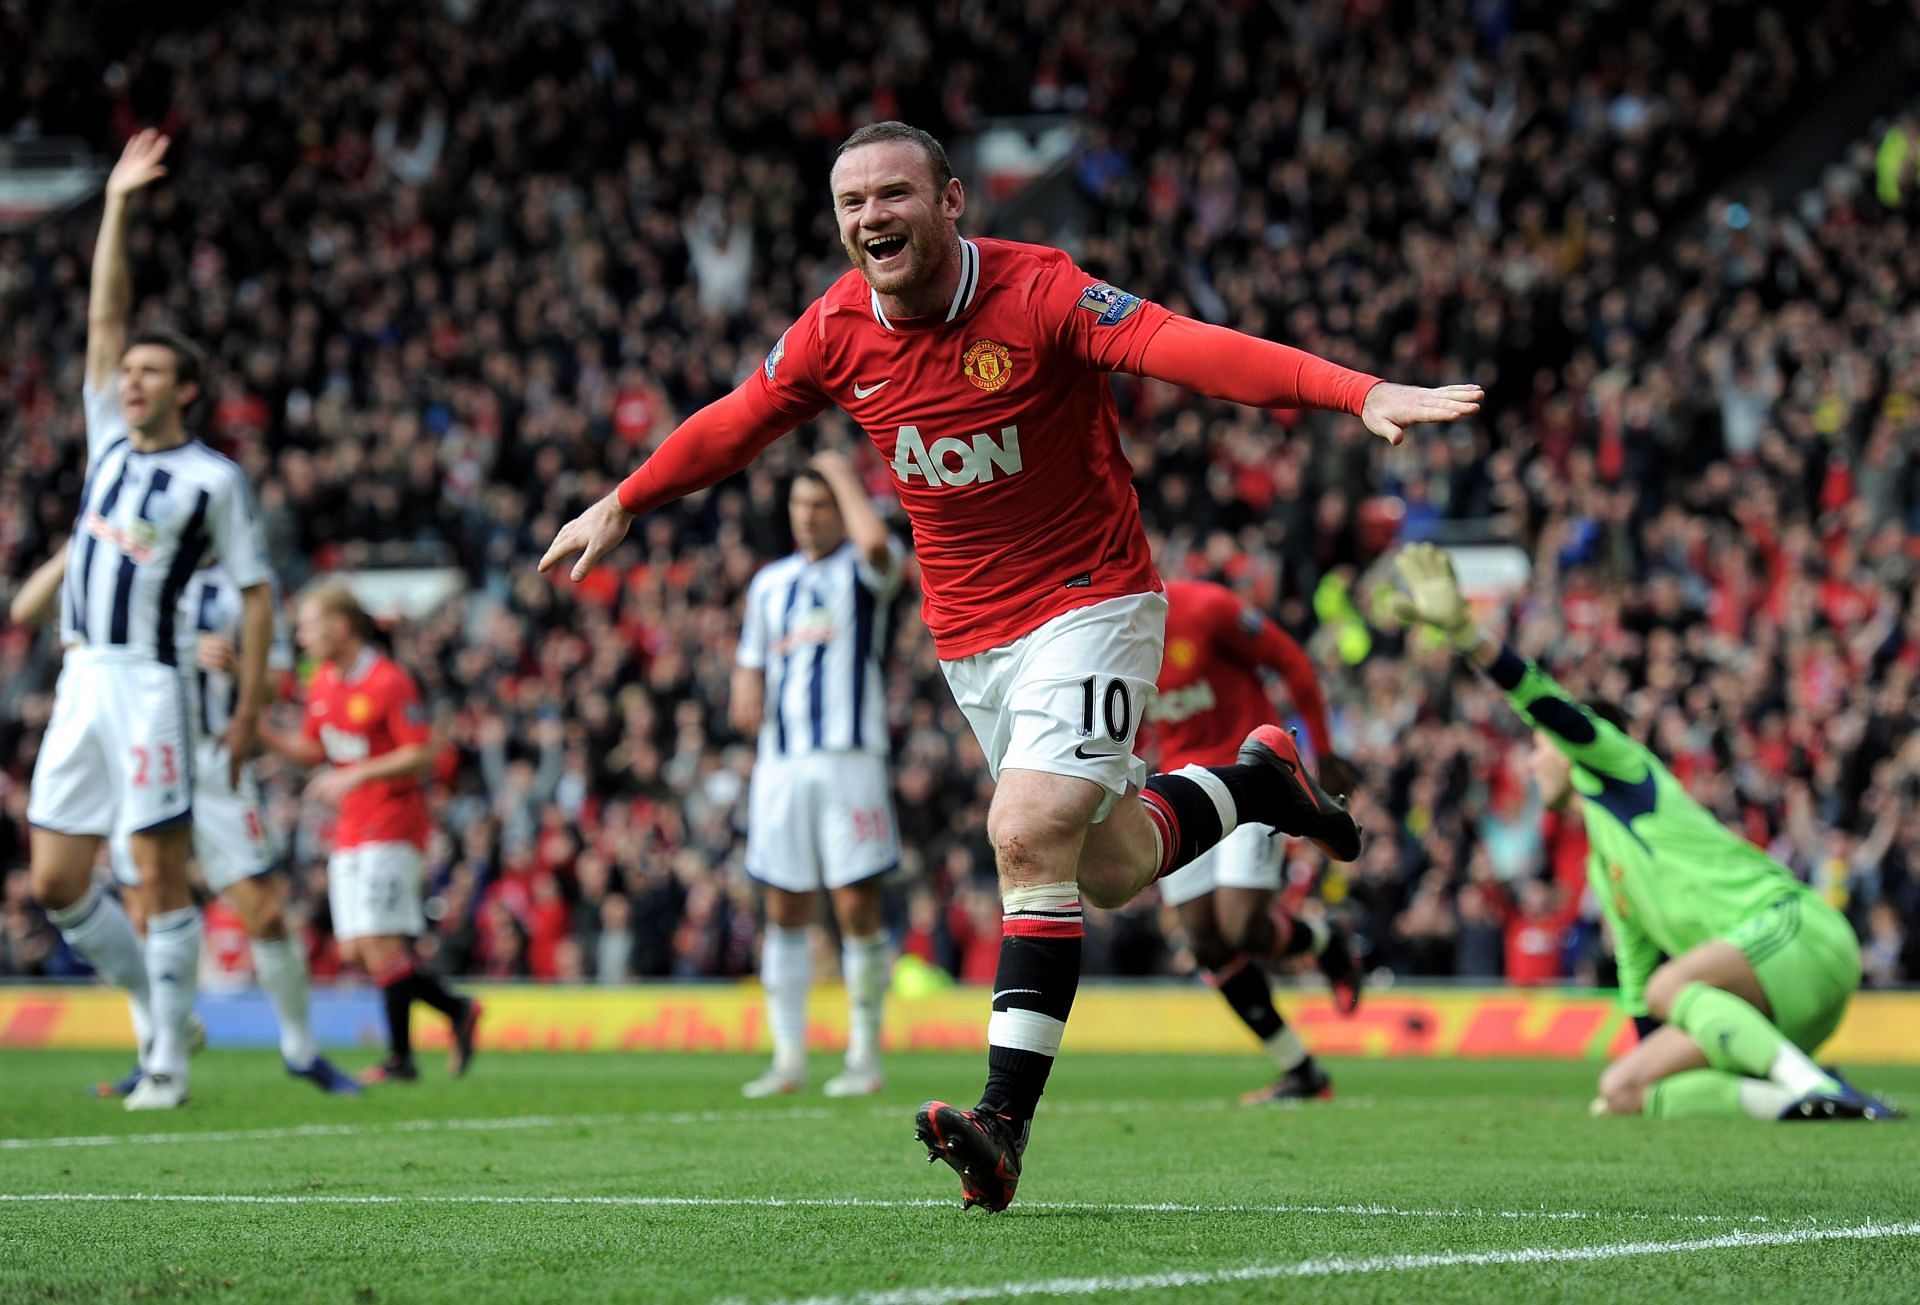 Wayne Rooney wore the number 10 shirt at Manchester United between 2007 and 2017